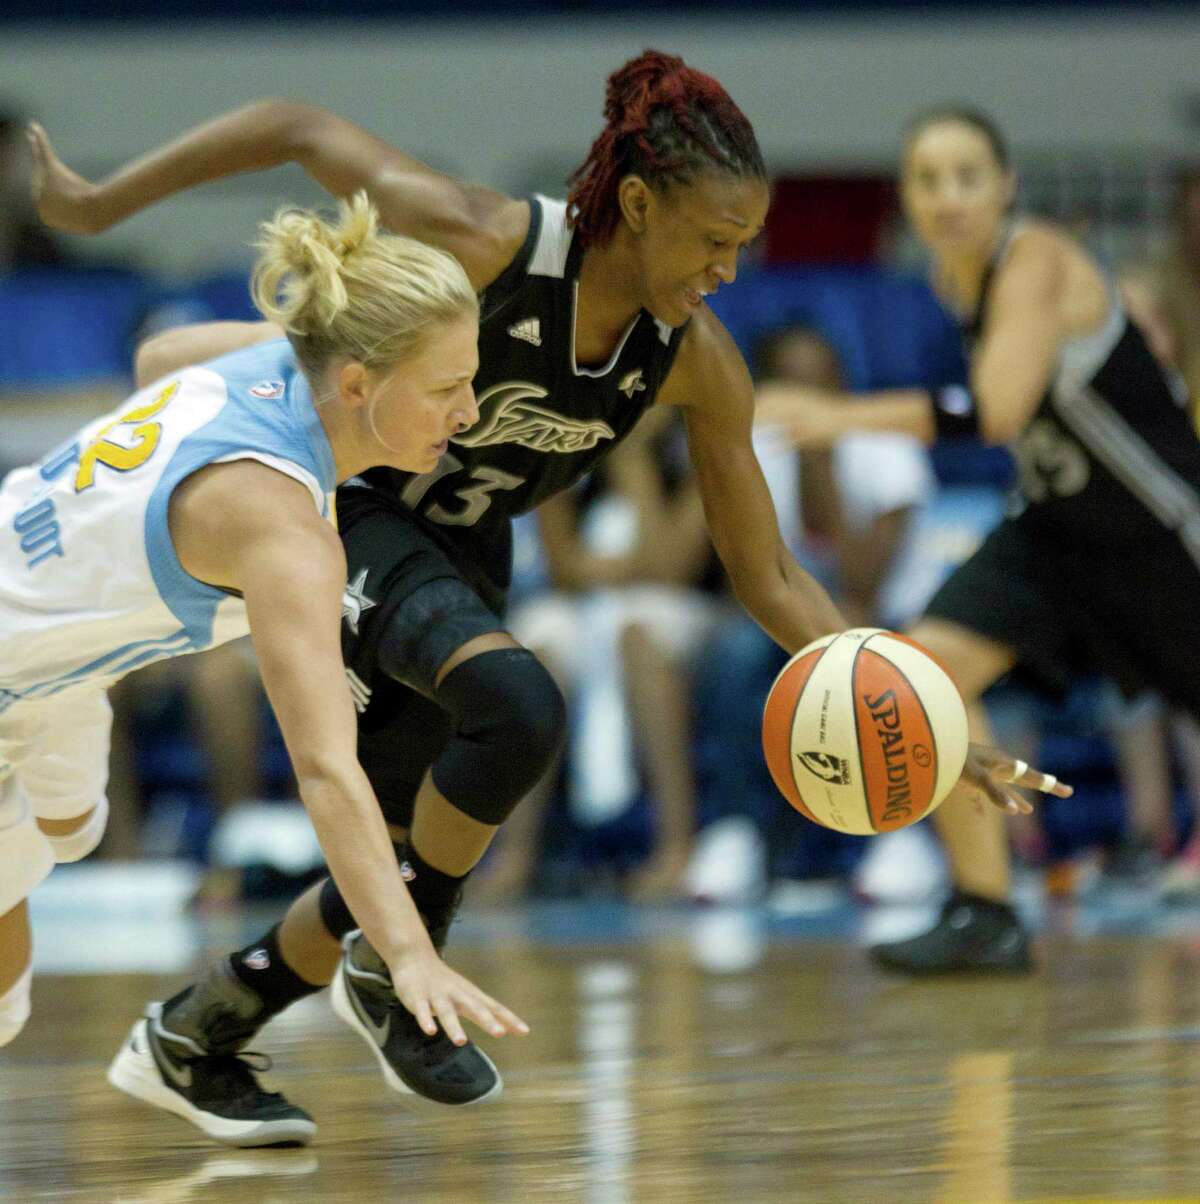 San Antonio Silver Stars' Danielle Robinson (13) steals the ball from Chicago Sky's Courtney Vandersloot during the first half of an WNBA basketball game, Wednesday, July 11, 2012, in Rosemont, Ill. (AP Photo/Charles Rex Arbogast)